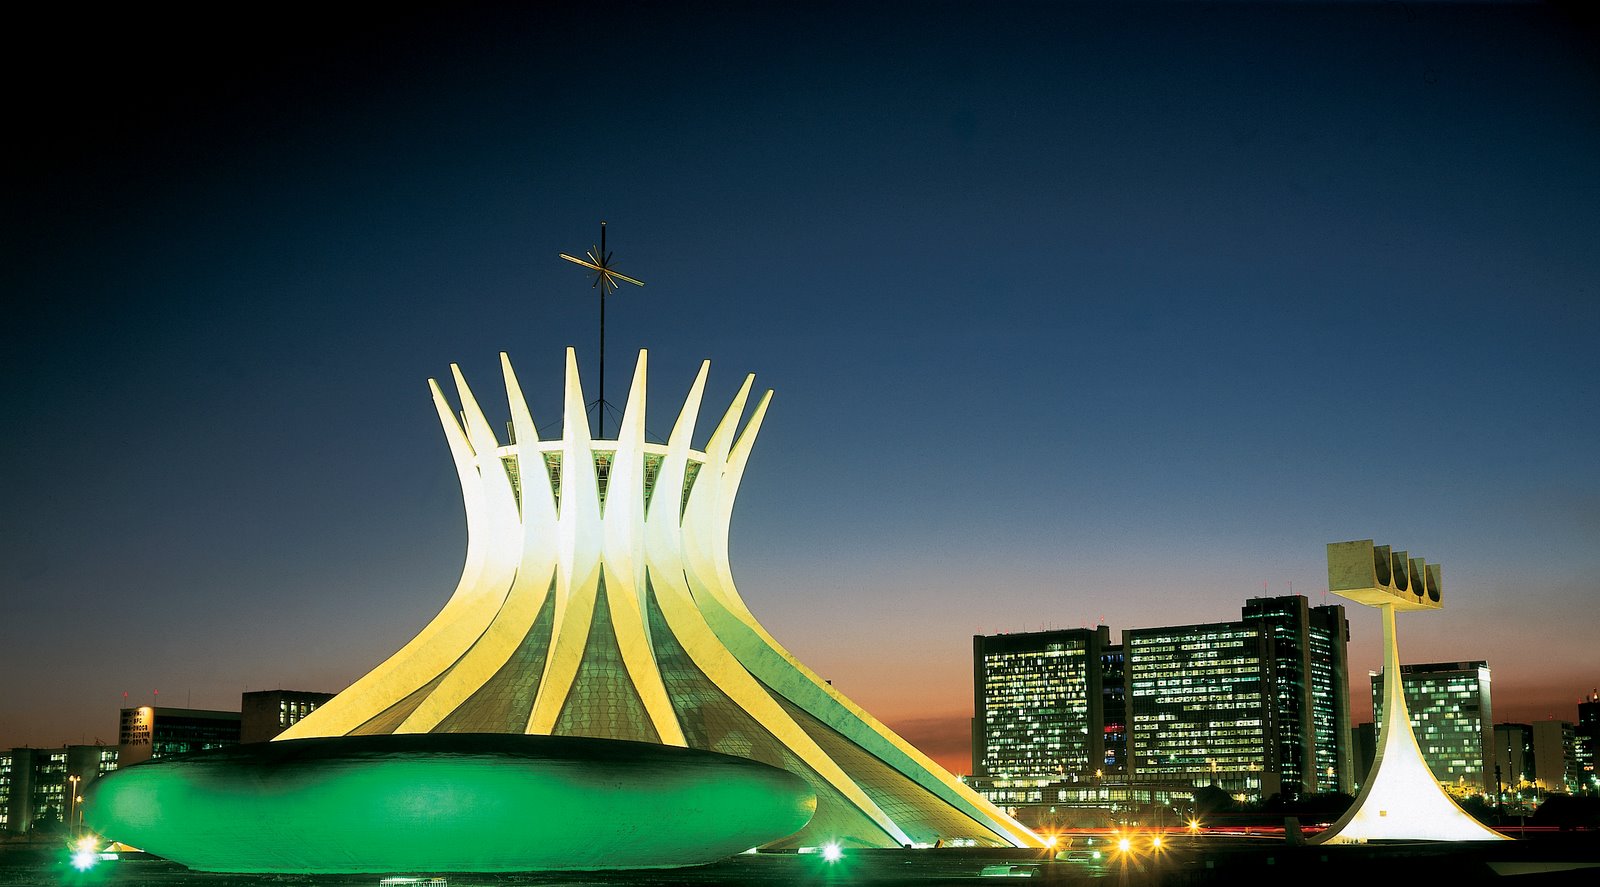 The Cathedral of Brasilia, архитектура